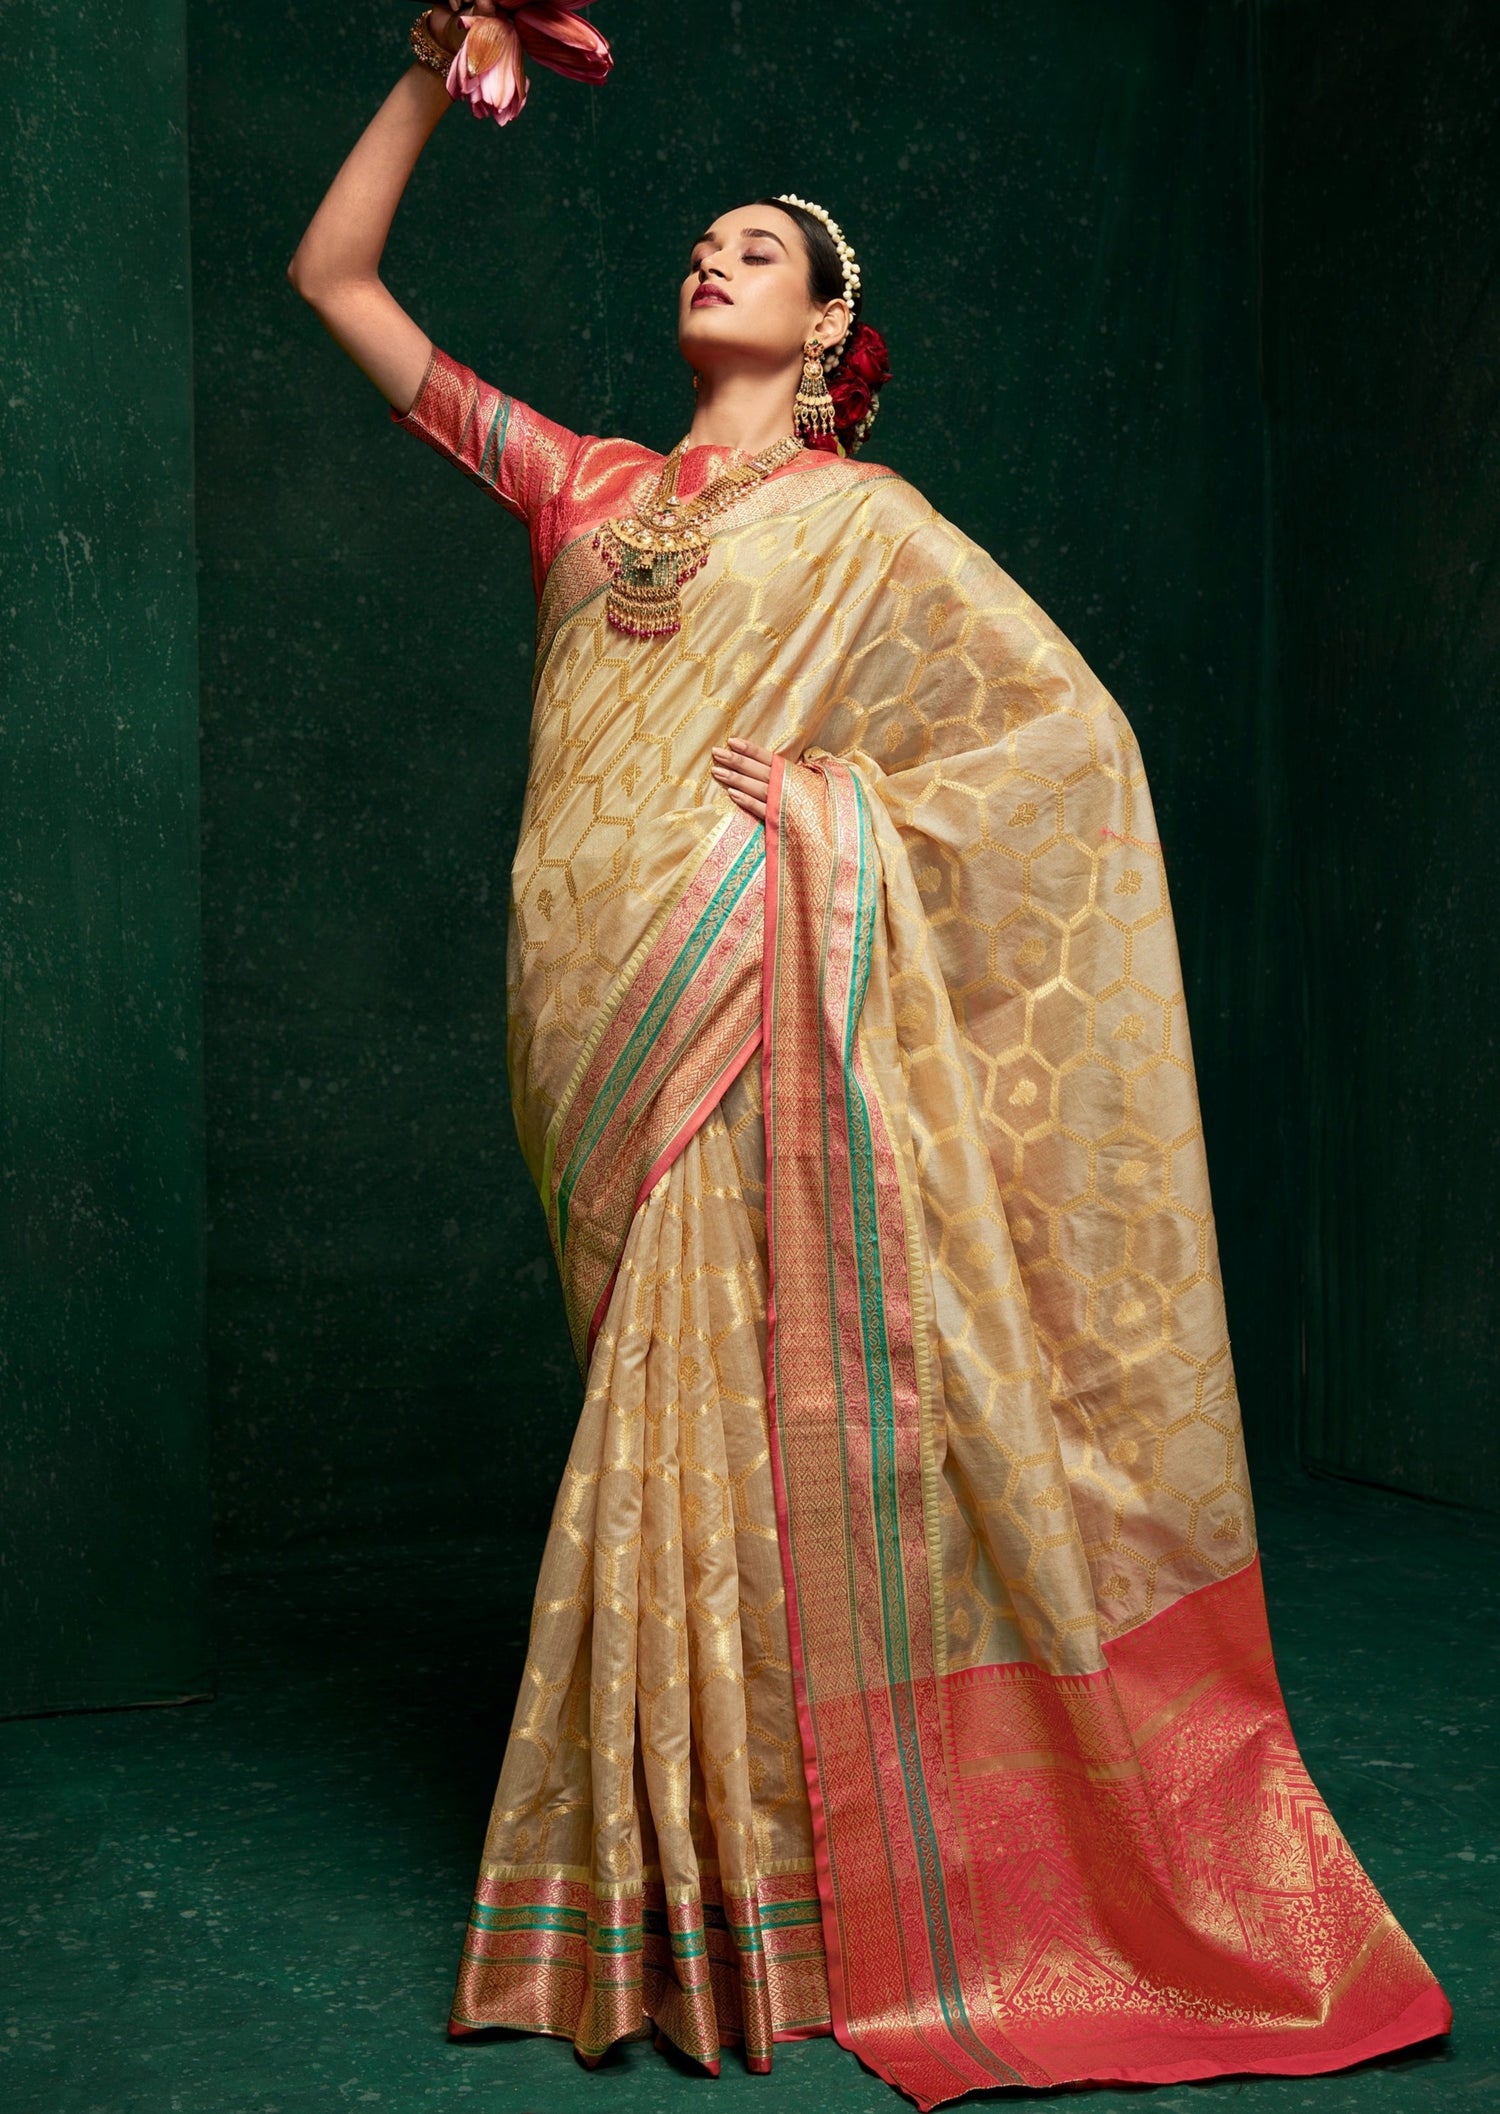 Woman in saree in front of a green wall